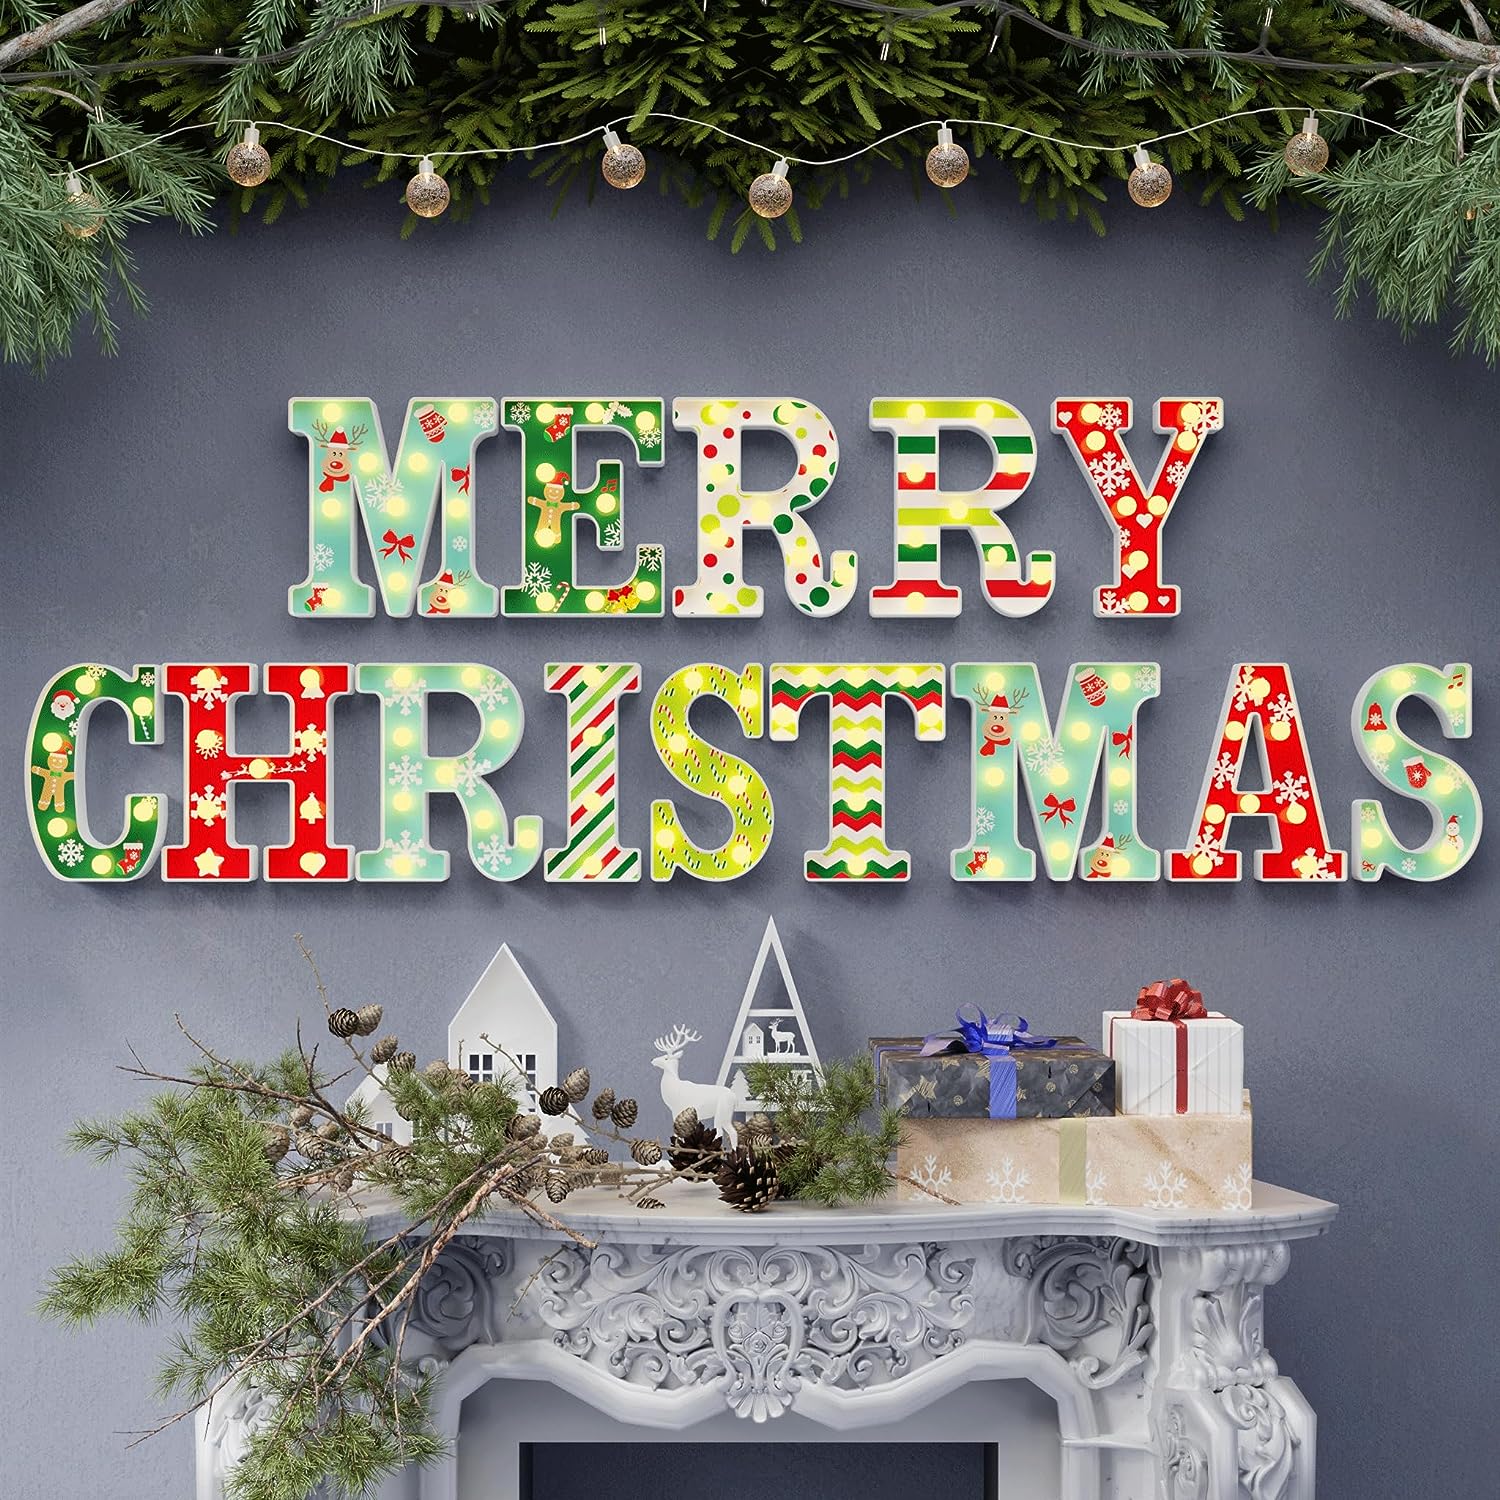 Christmas decorations-14 LED letter Christmas lights "Happy Christmas", suitable for Christmas party home decoration, surface UV printing snowflakes, Christmas trees, elk, Christmas hats, etc., warm white